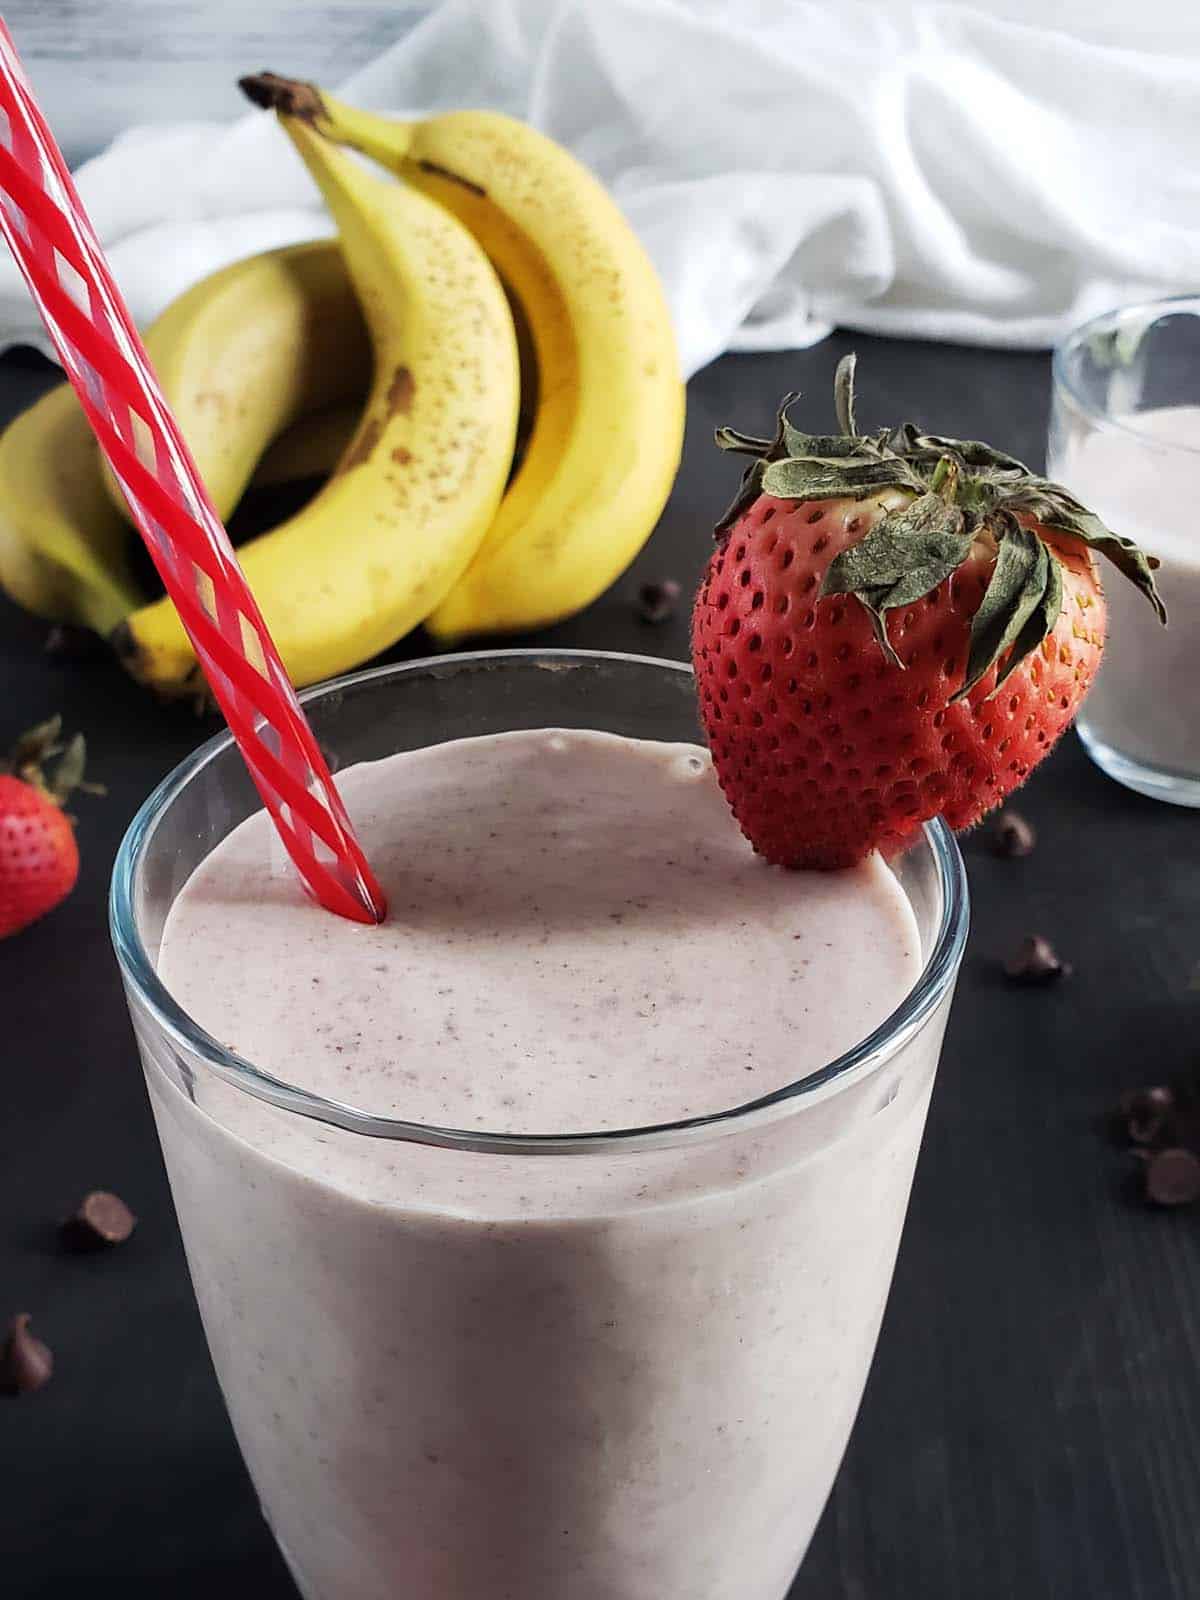 Strawberry banana chocolate chip smoothie in a glass.